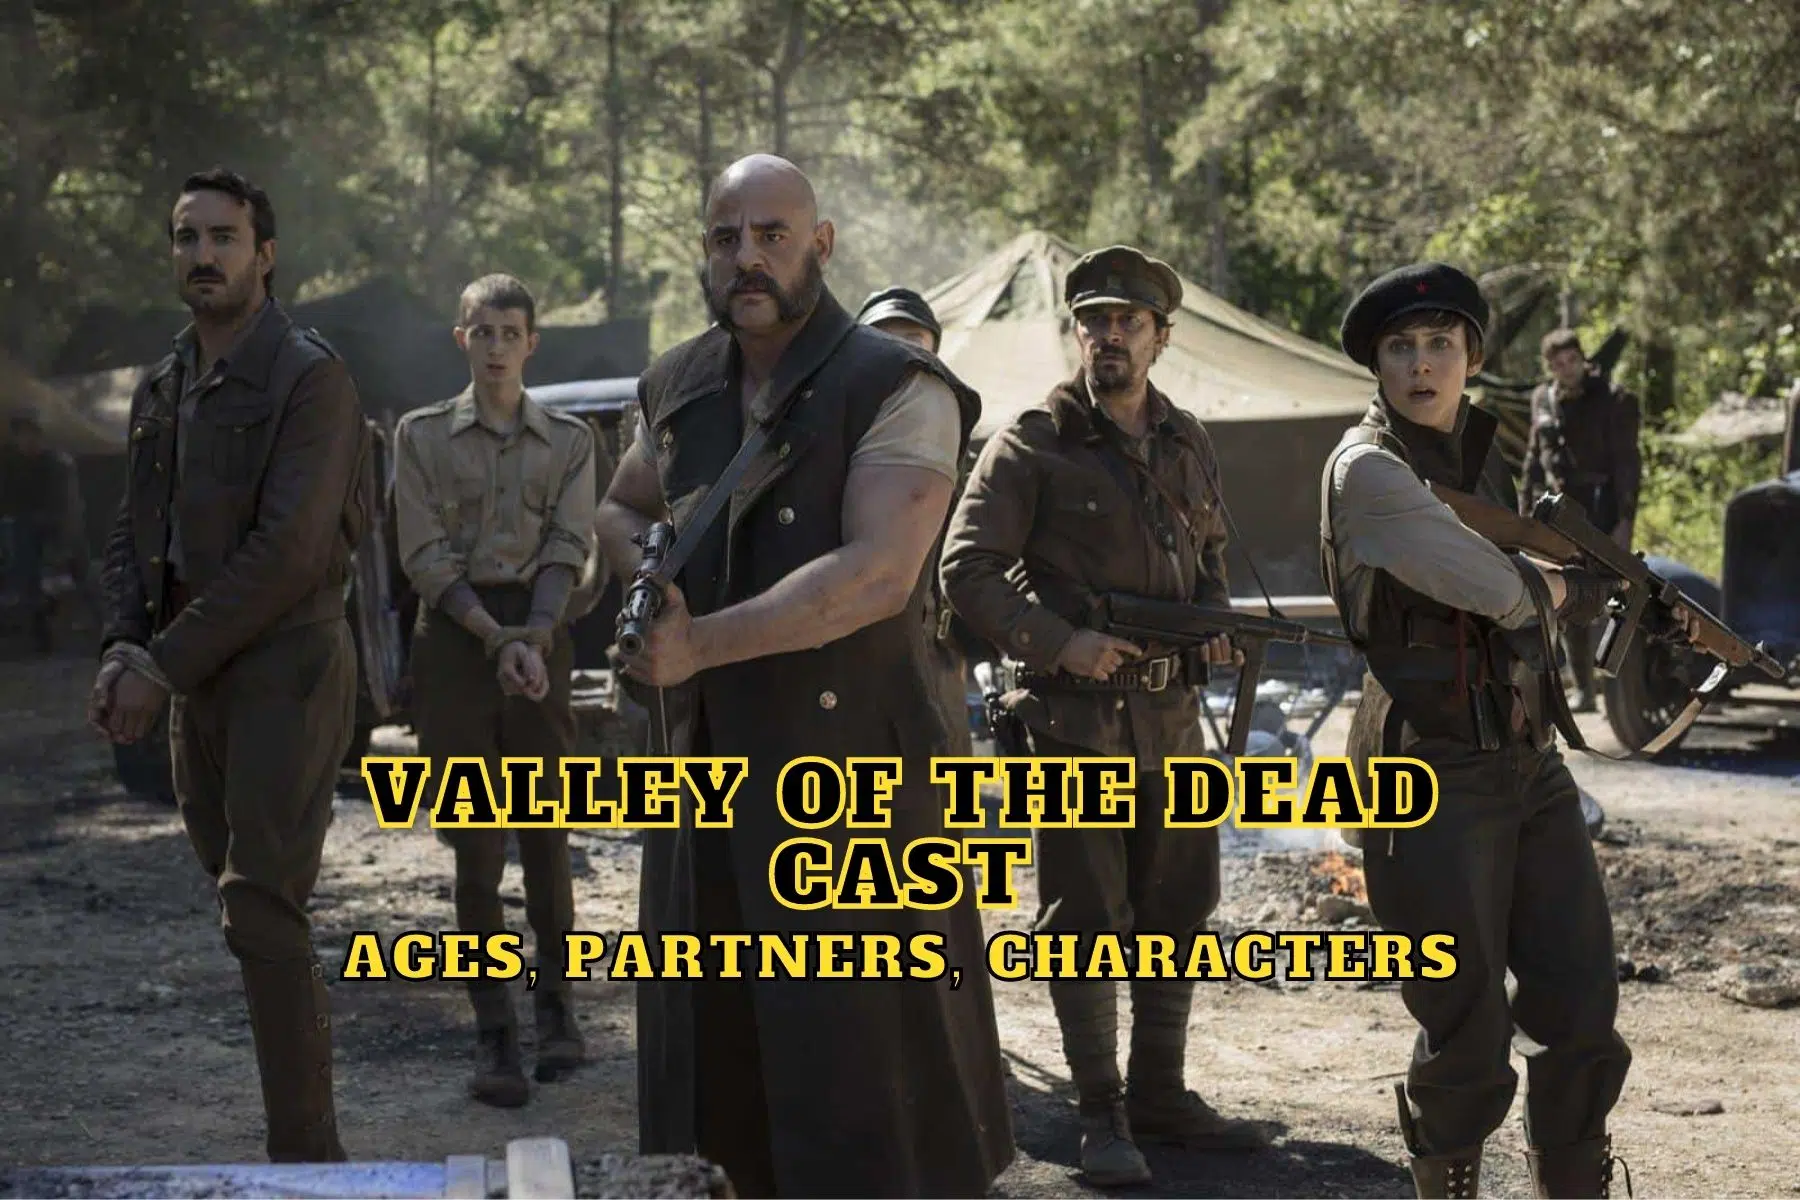 Valley of the Dead Cast - Ages, Partners, Characters